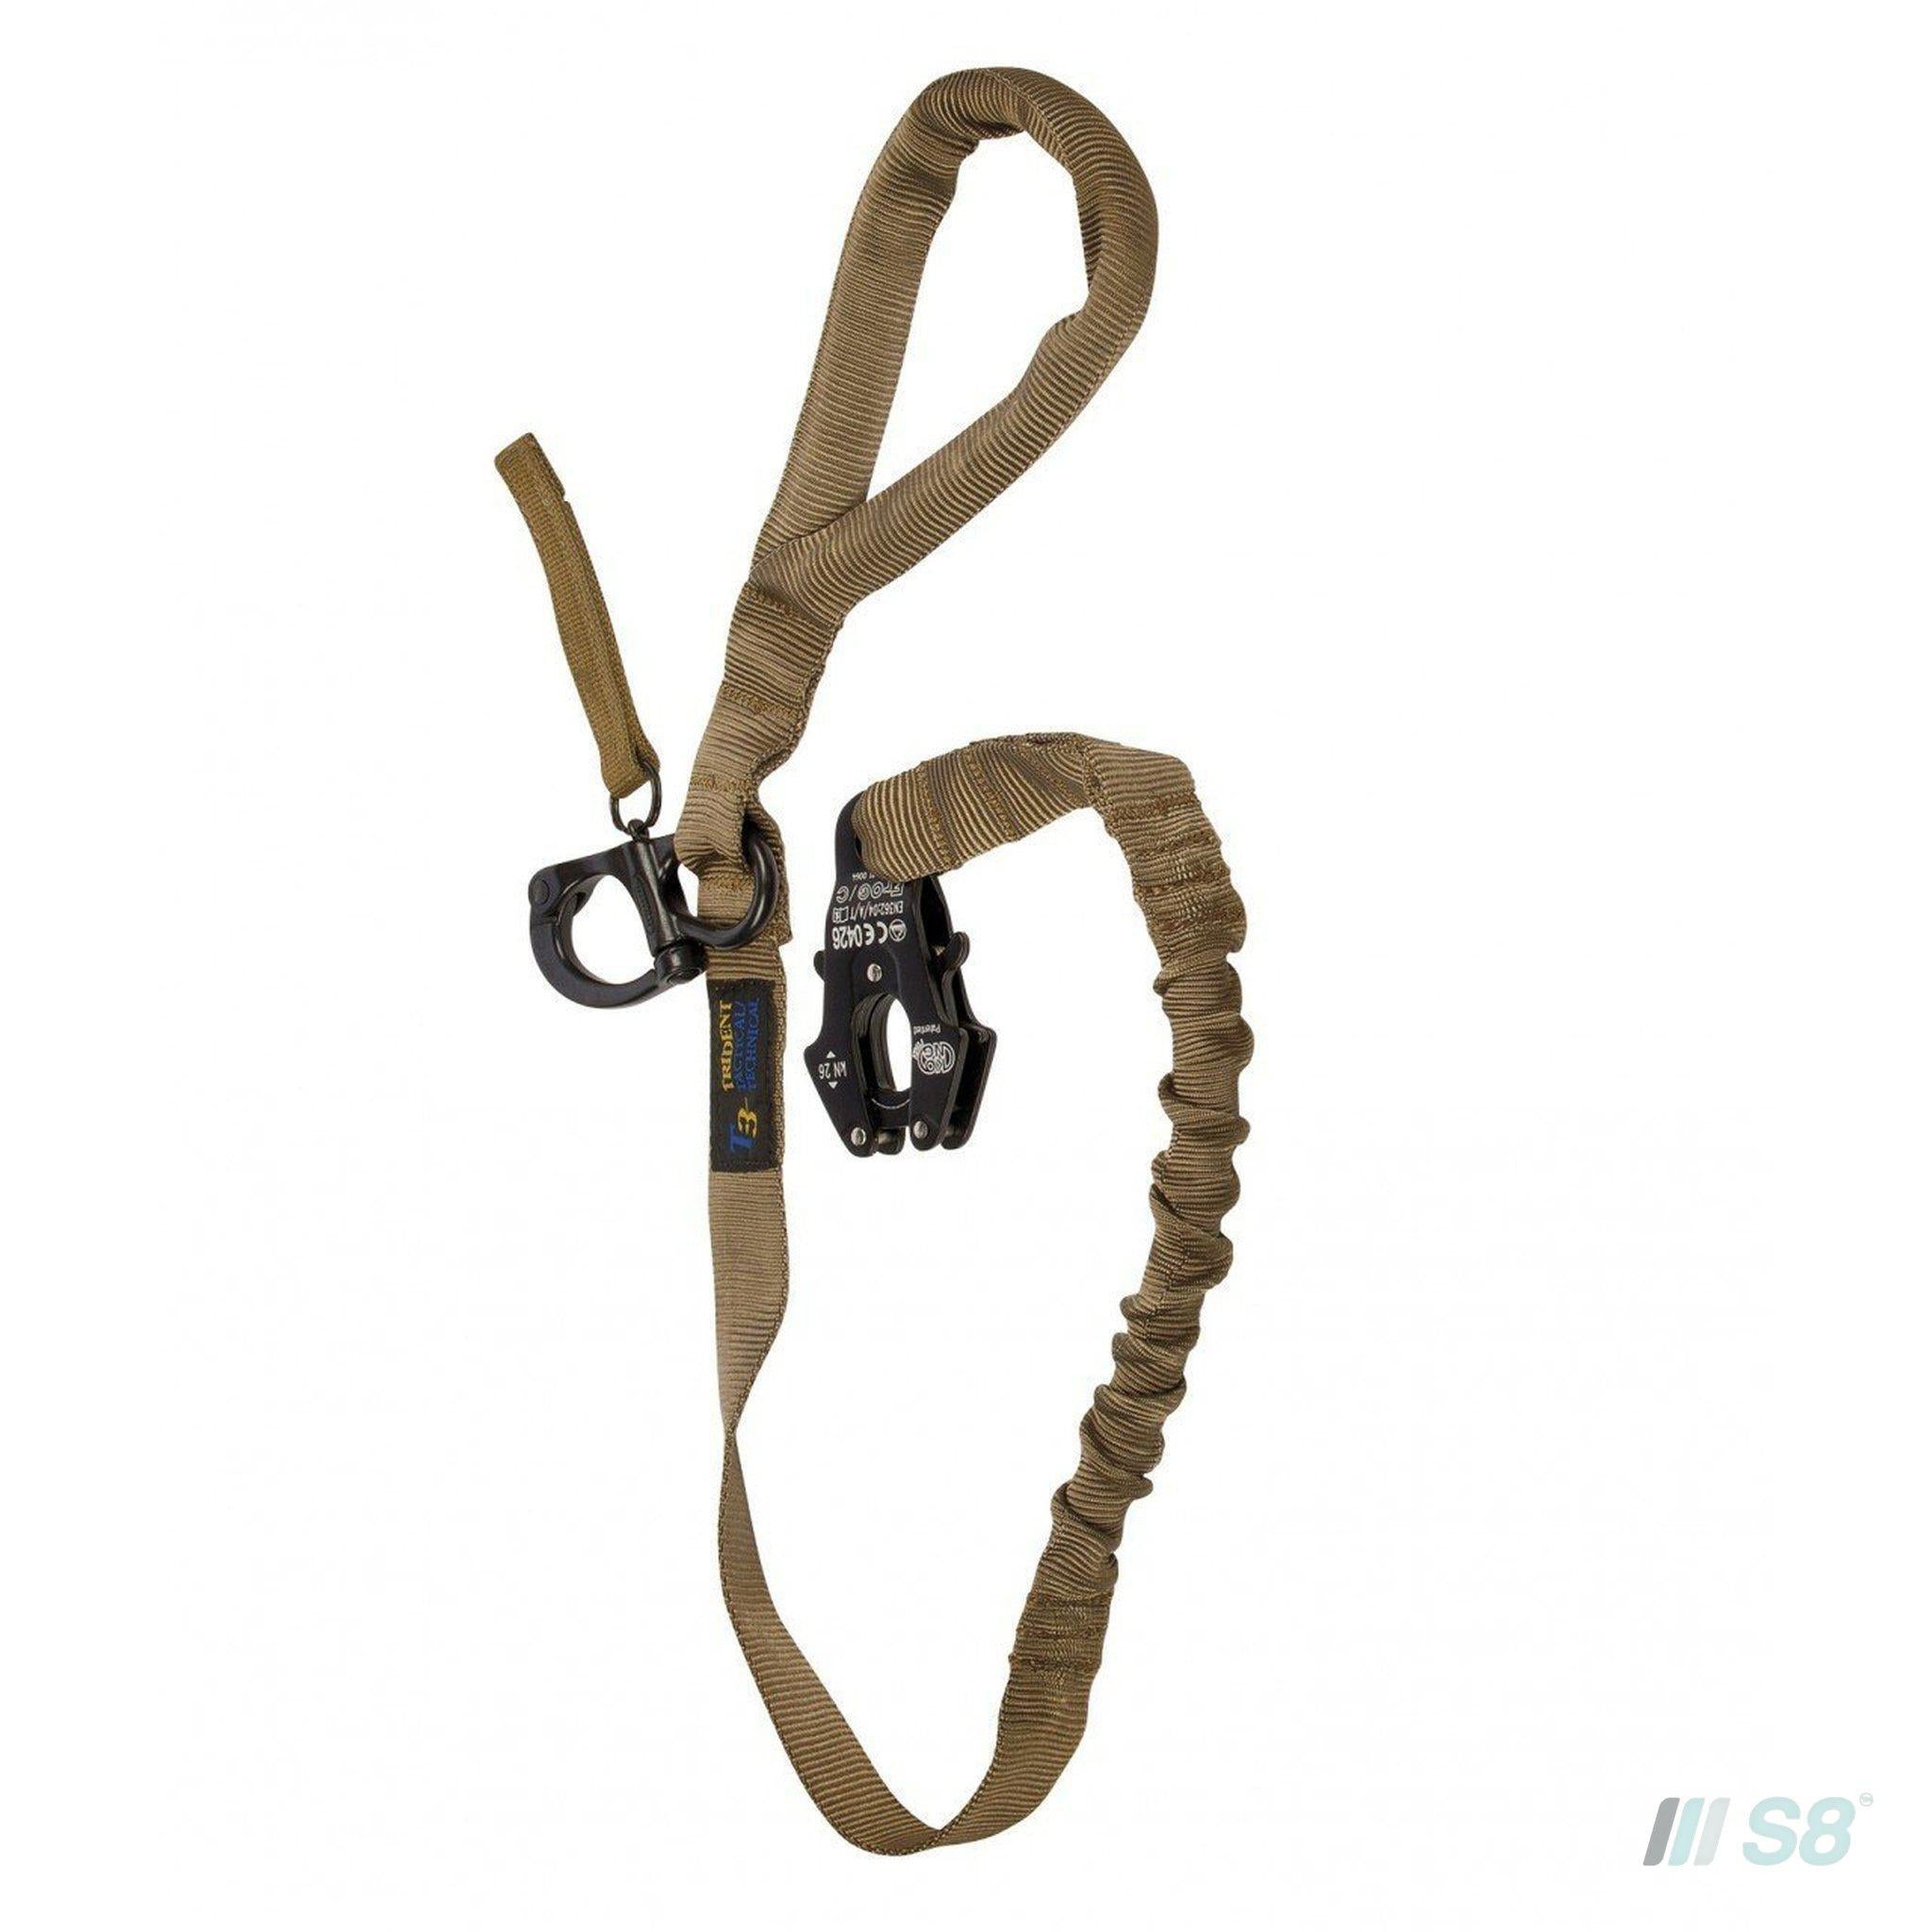 T3 K-9 Tactical Lead-T3-S8 Products Group